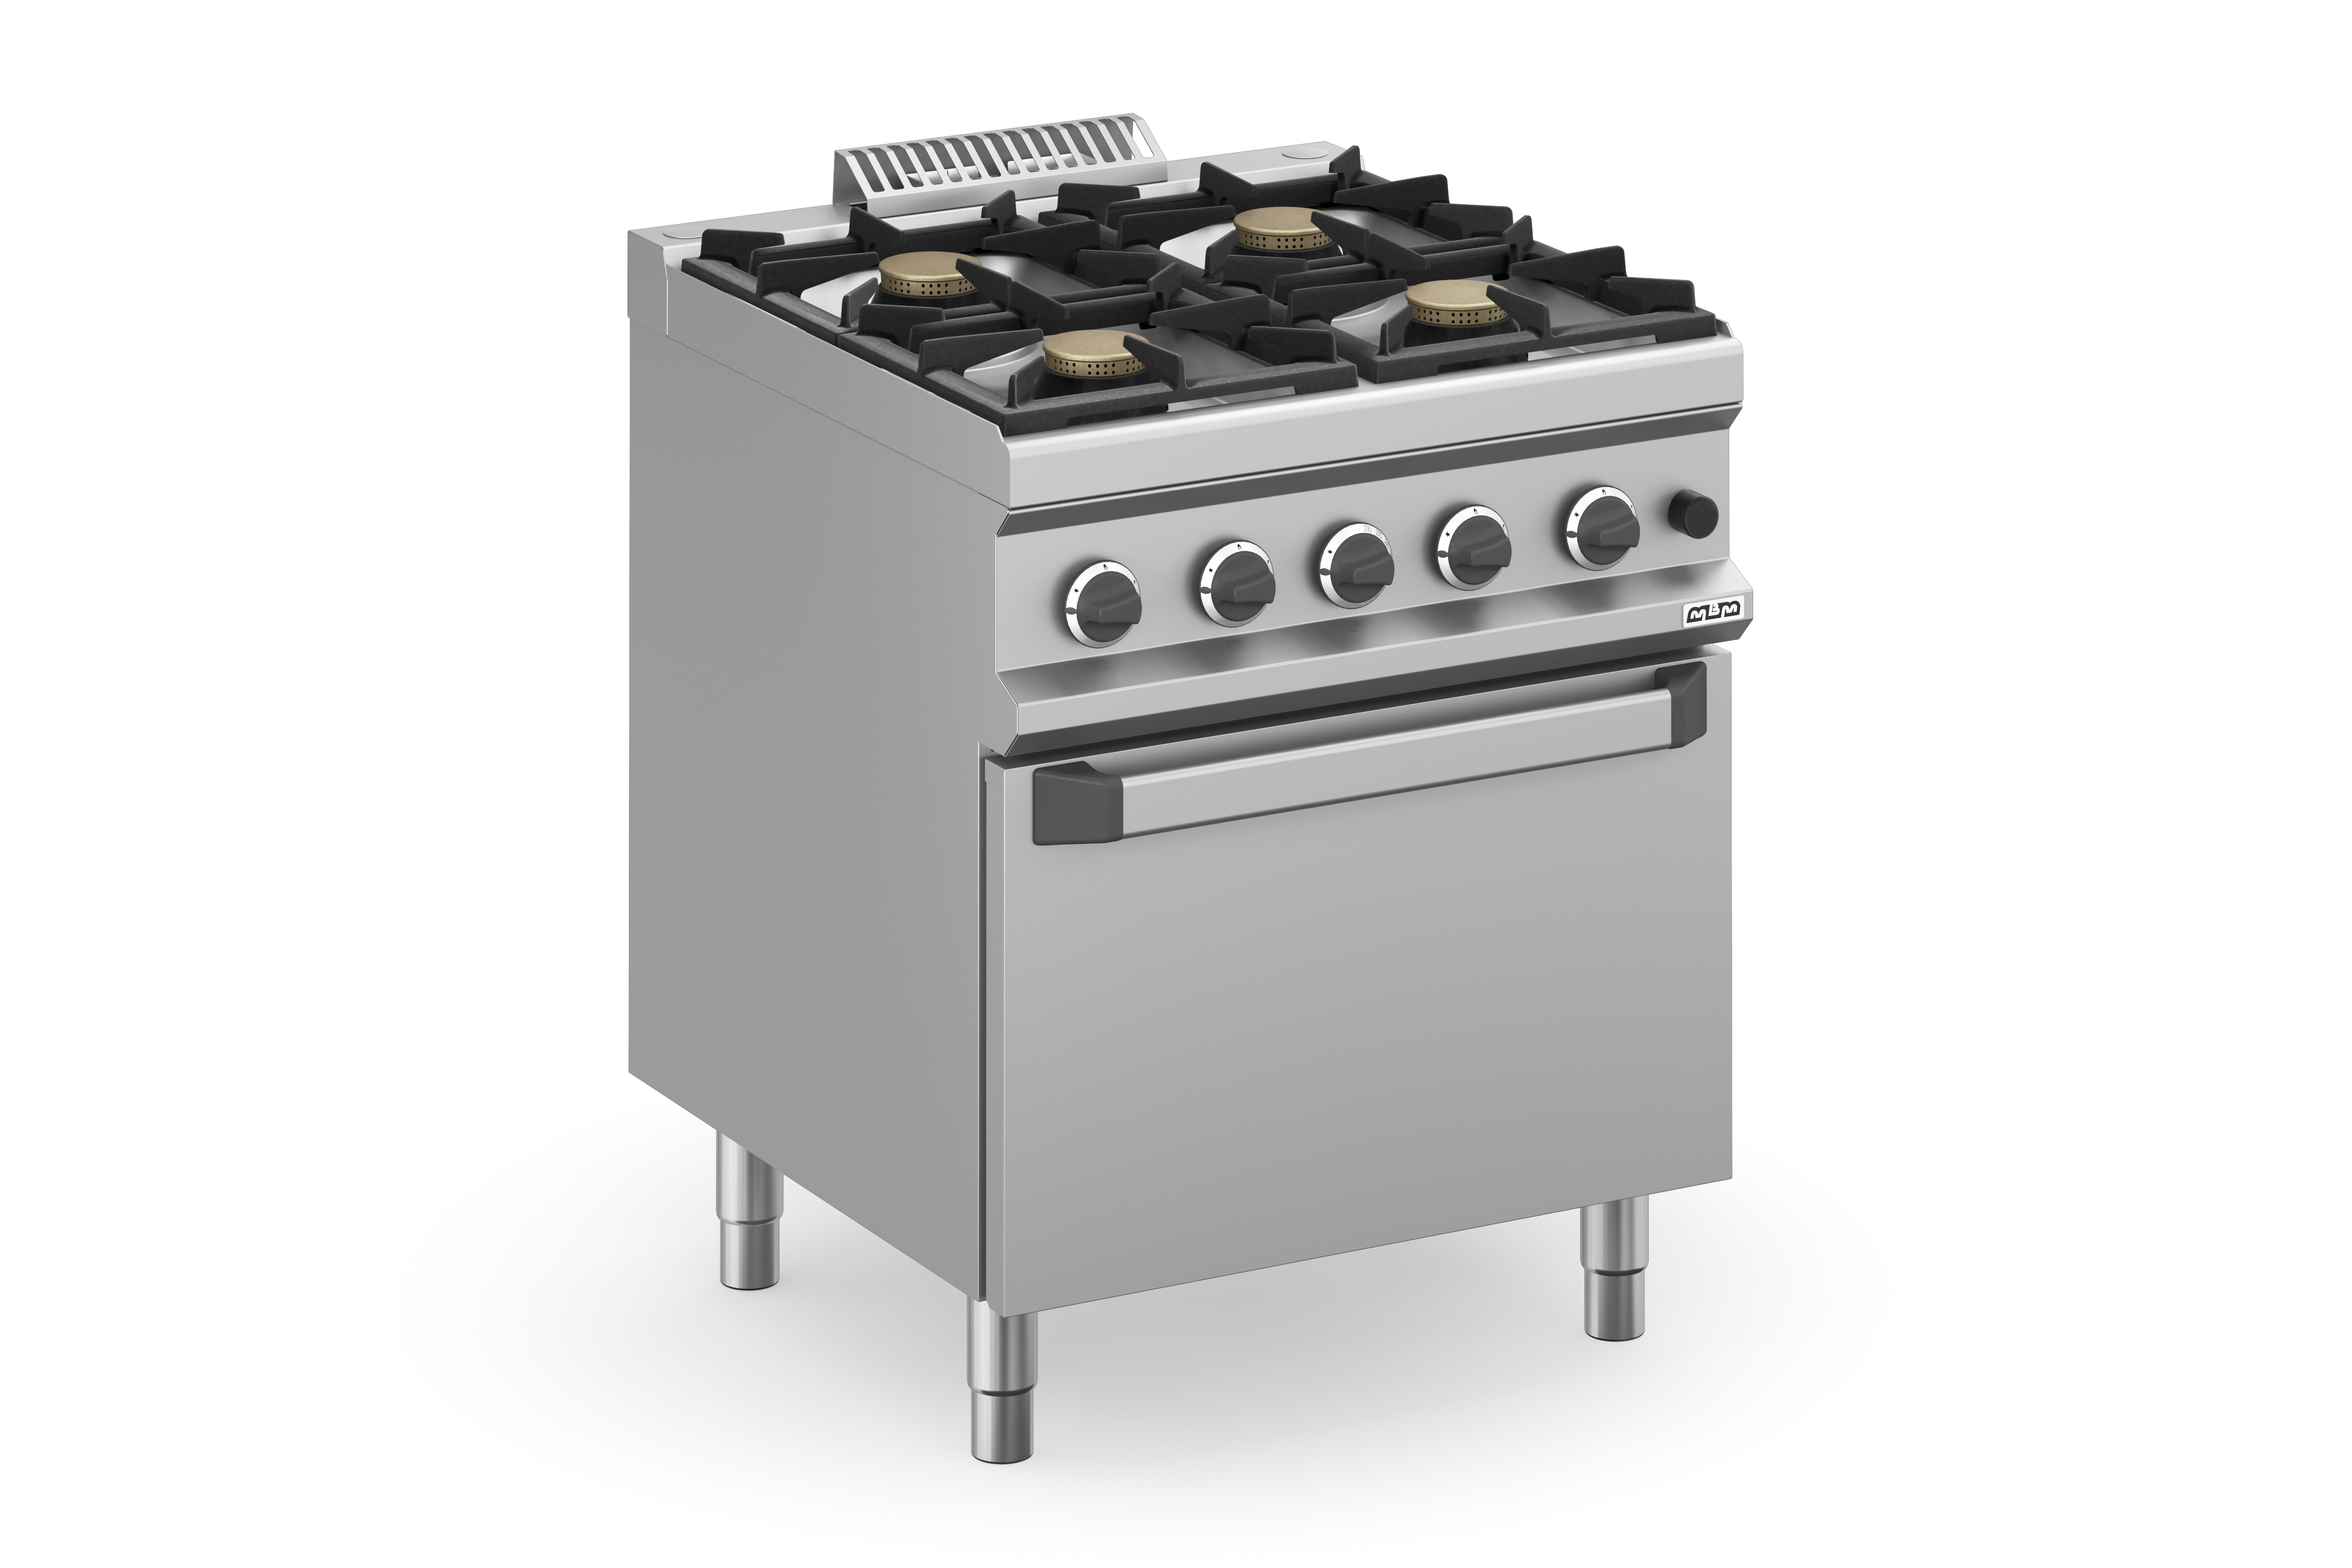 Magistra Plus 700 MFB77FGXS 4 Burners Gas Cooker with Gas Oven